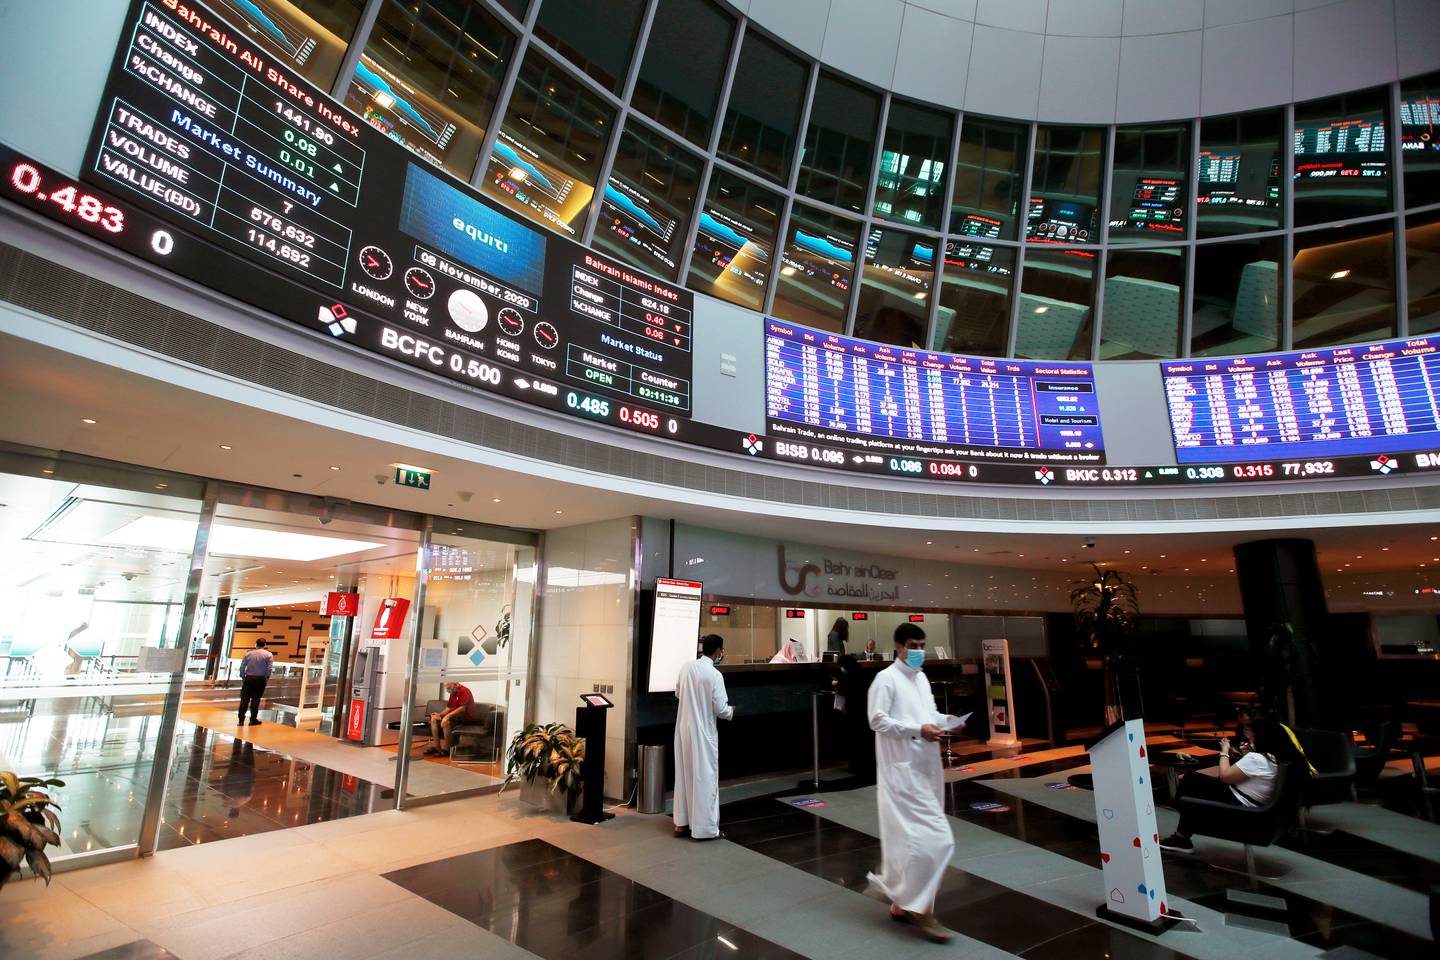 The Bahrain Bourse has issued ESG reporting guidelines. Reuters